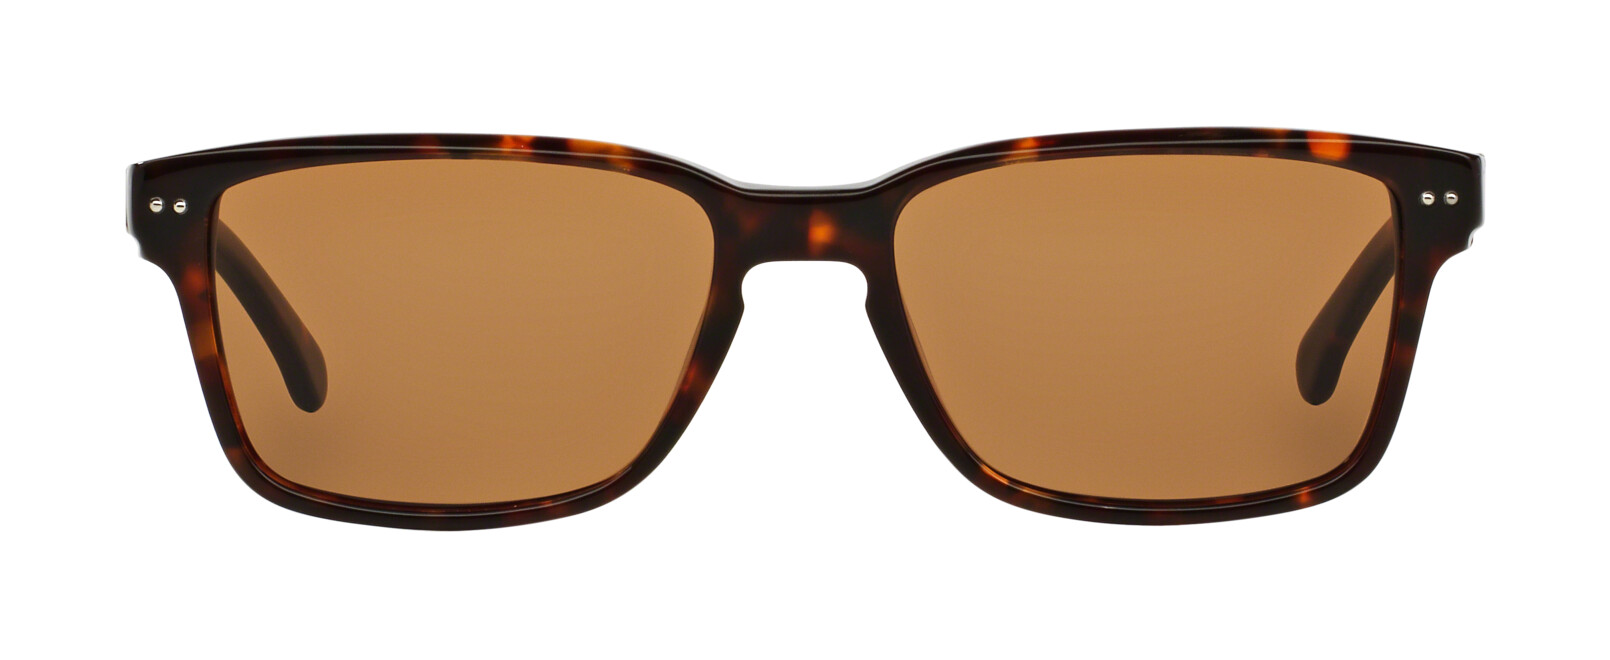 [products.image.front] Brooks Brothers 0BB 725S 501673 Sonnenbrille